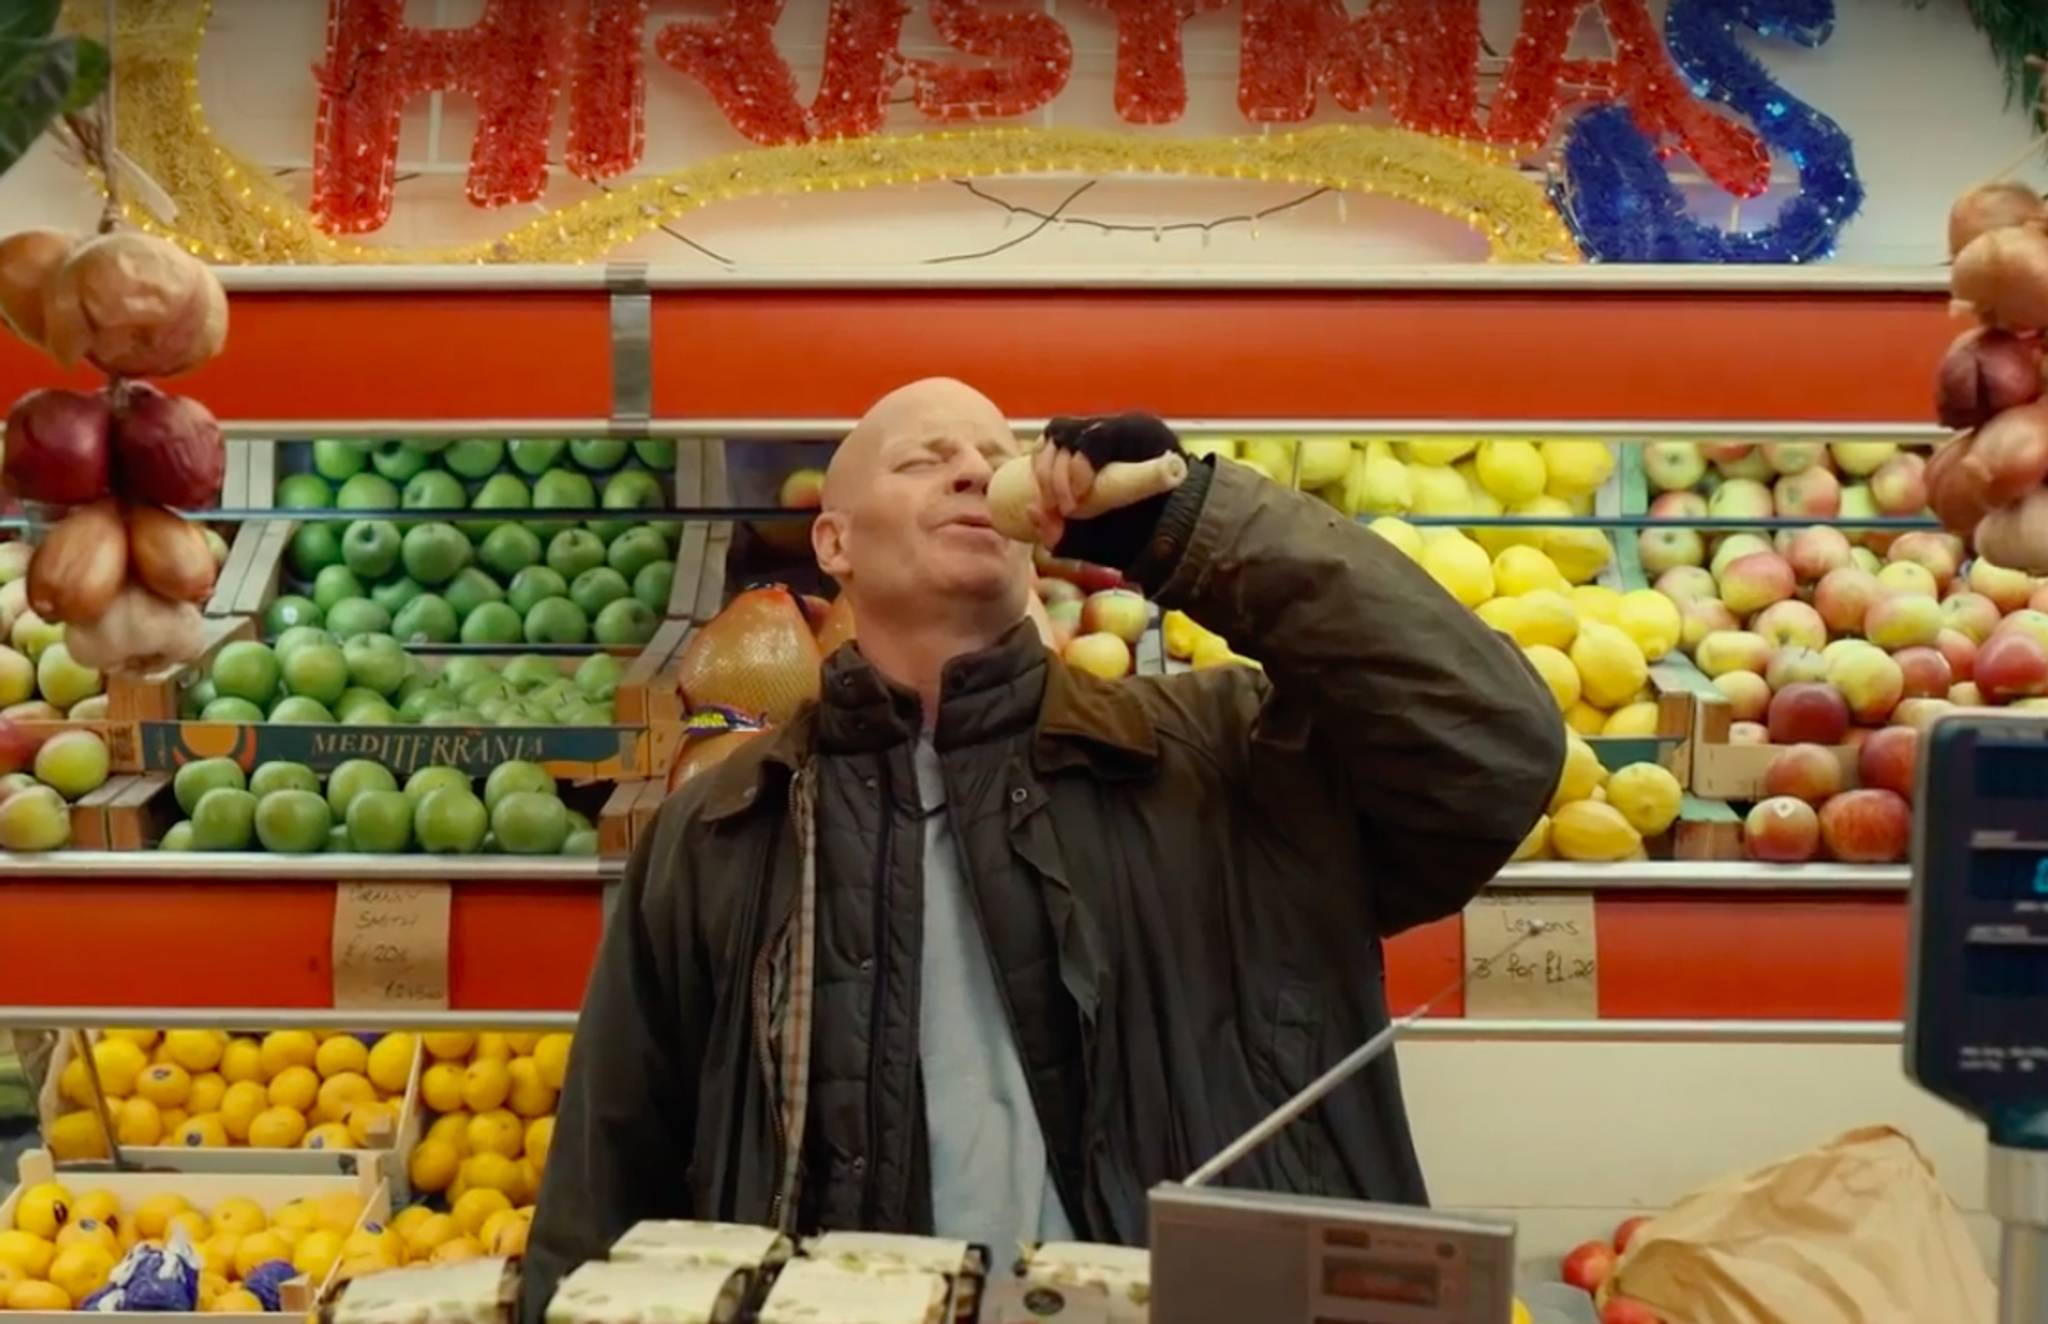 Visa's Xmas ad tells Britons to support the high street